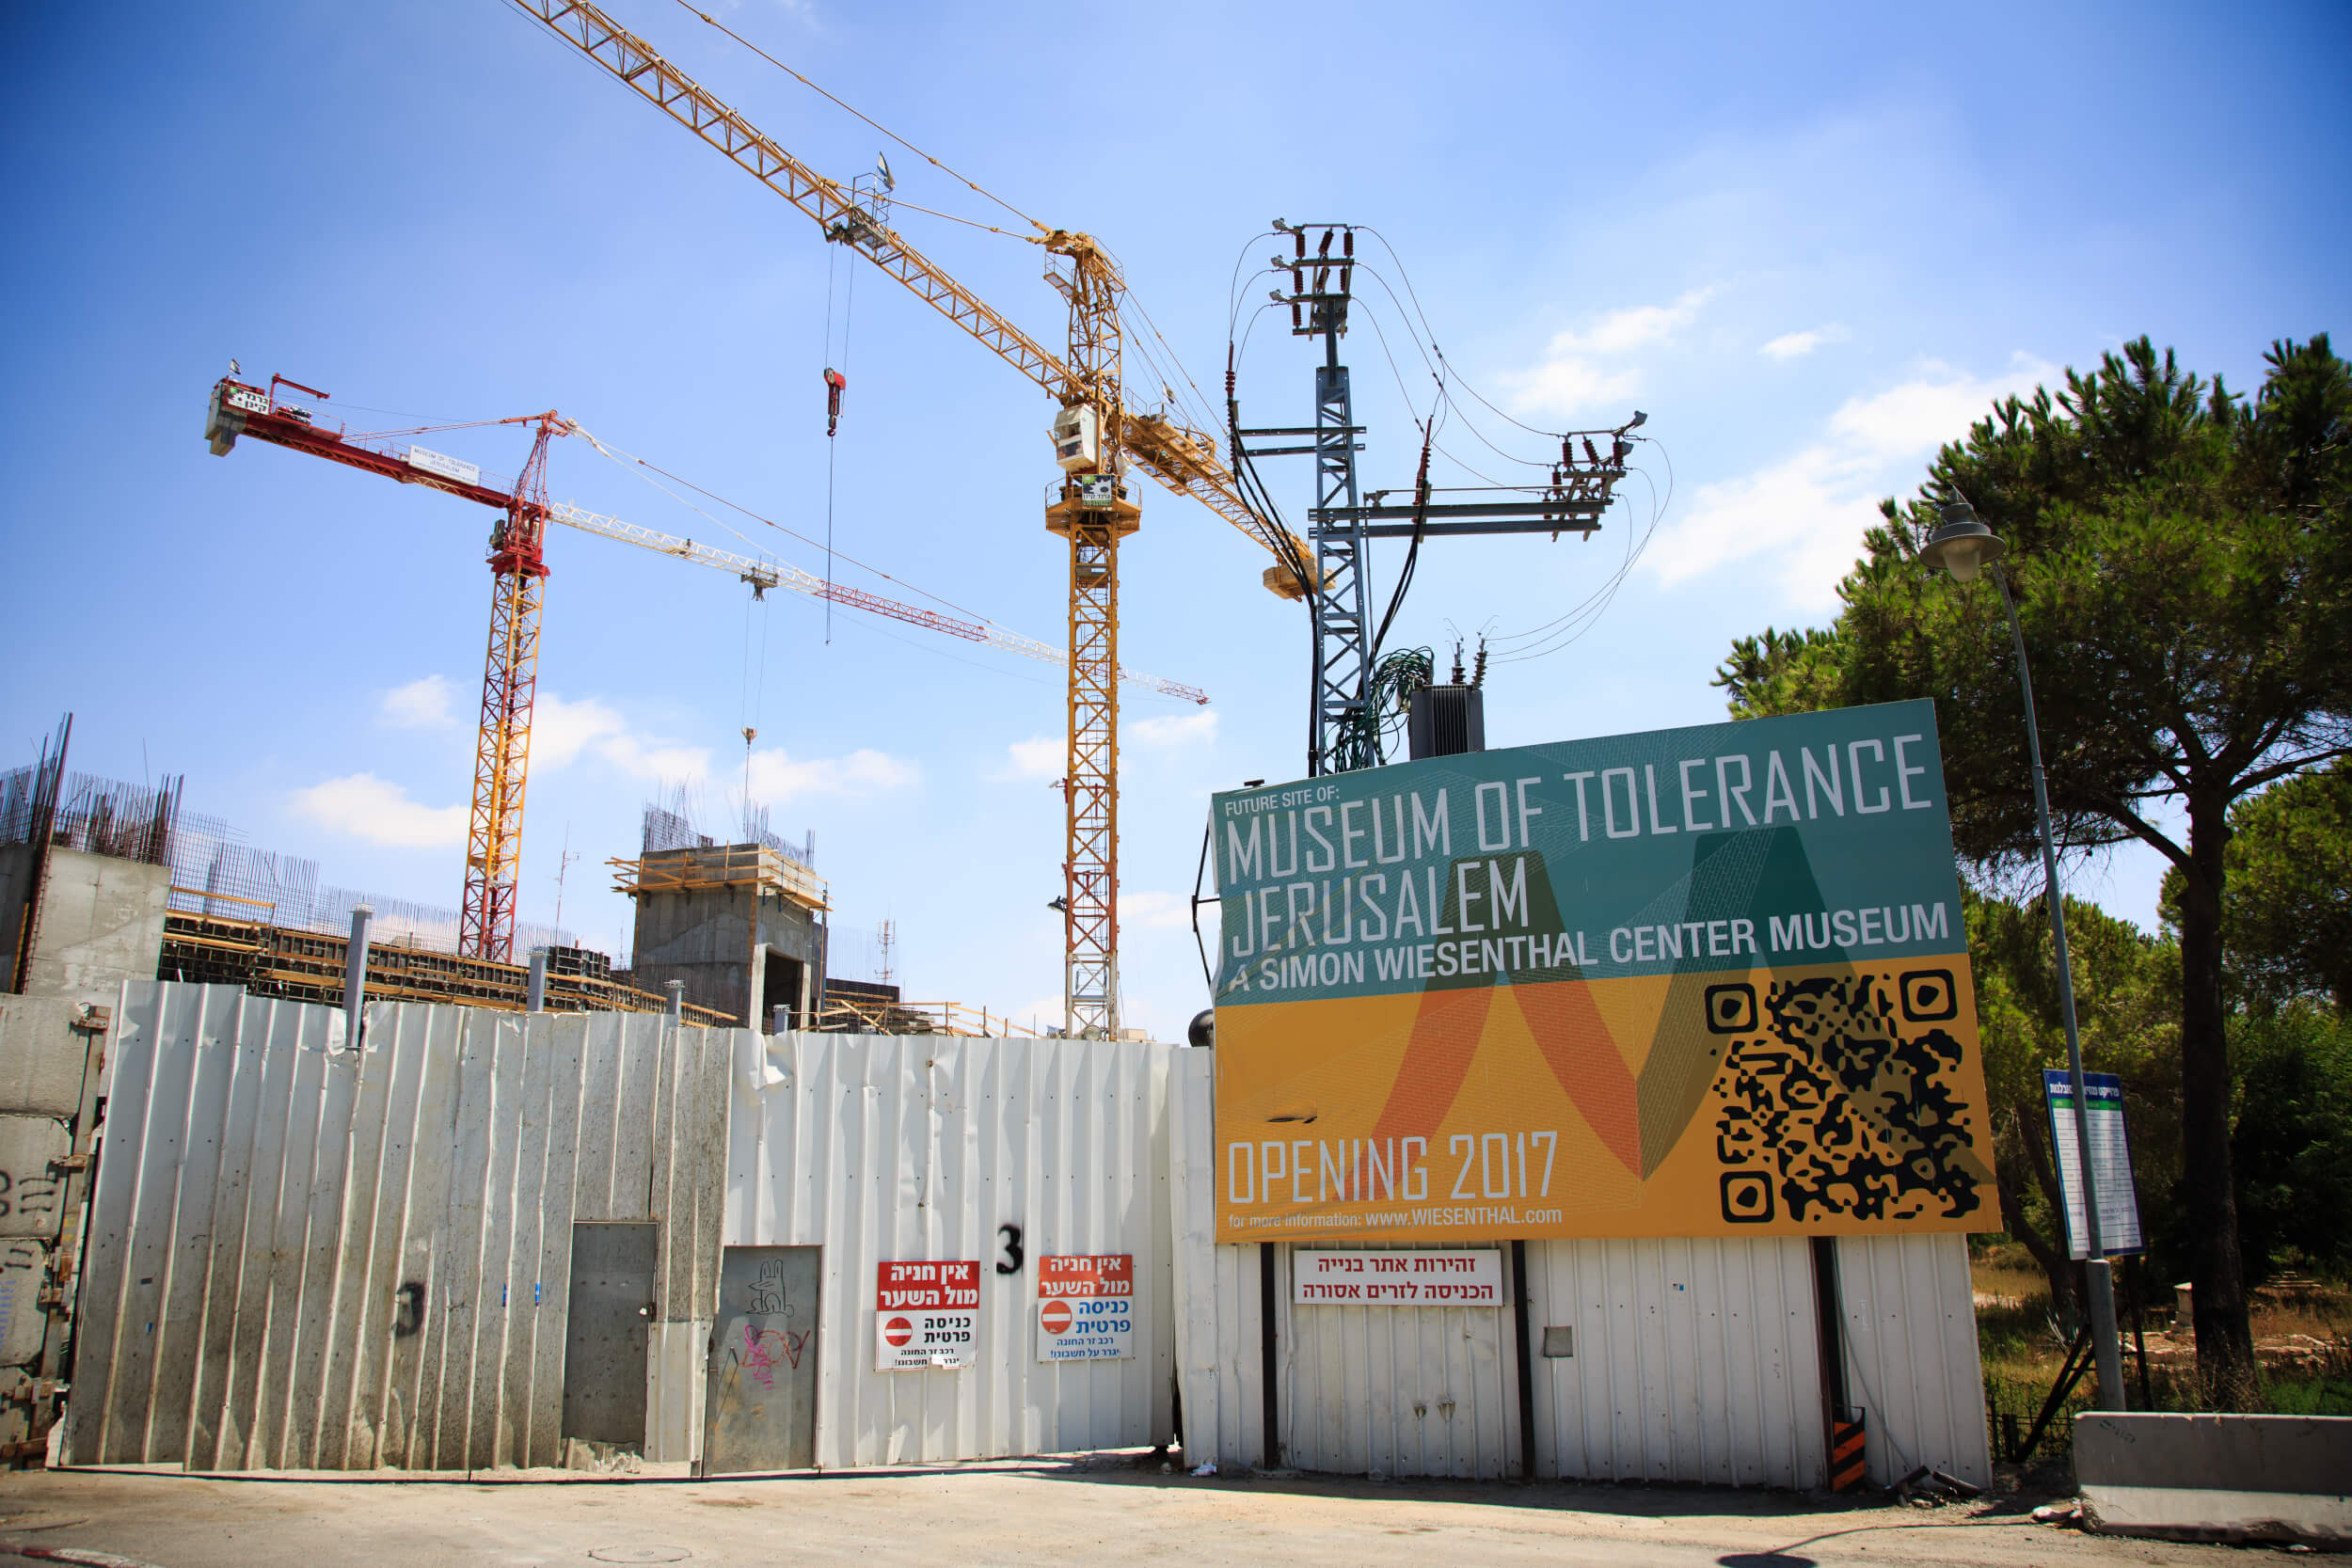 The Israeli Museum of Tolerance is set to open in 2017 and will be build on top of the age-old Mamilla cemetery in Jerusalem's Old City. According to the Islamic community, some of the Prophet Muhammad's companions were buried there. (Photo: Pablo Castellani)